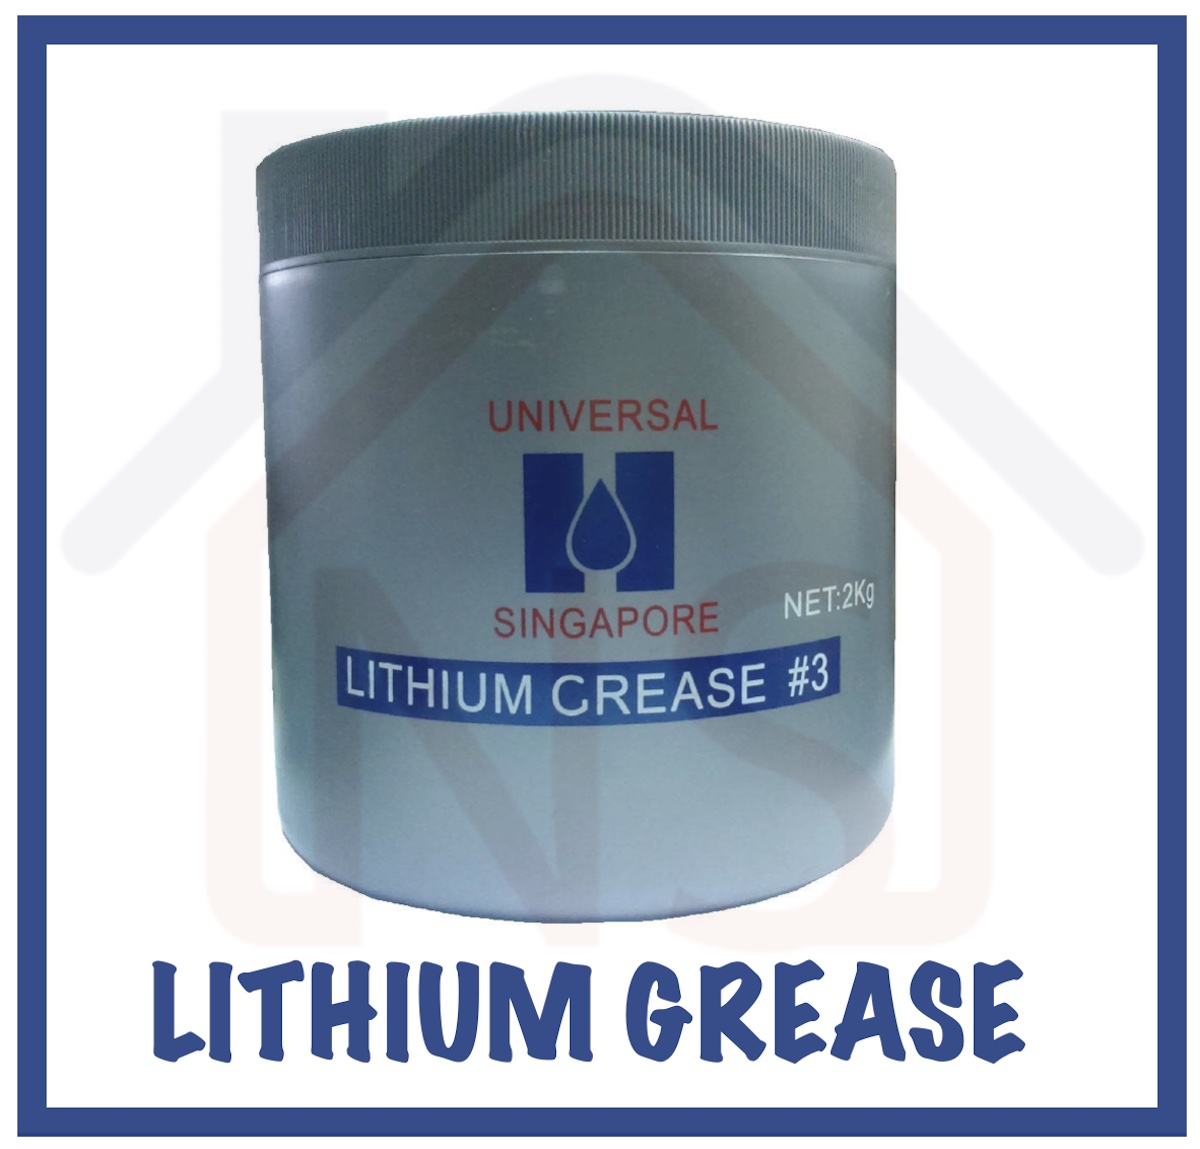 SUPER LUBE 21030 Synthetic Grease Multi Purpose Lubricant Tube